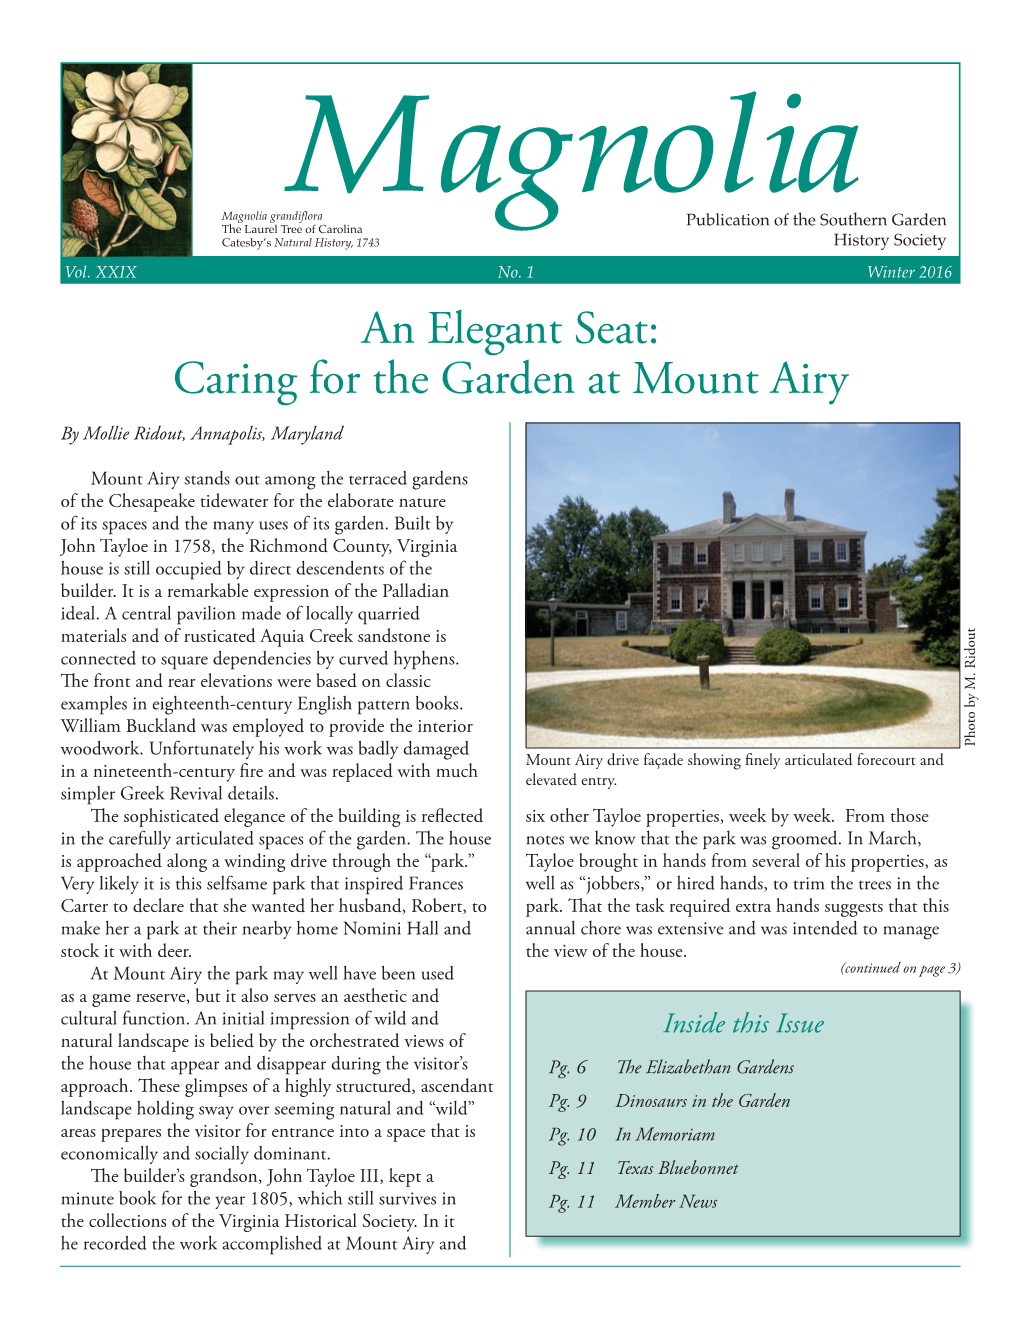 Caring for the Garden at Mount Airy by Mollie Ridout, Annapolis, Maryland